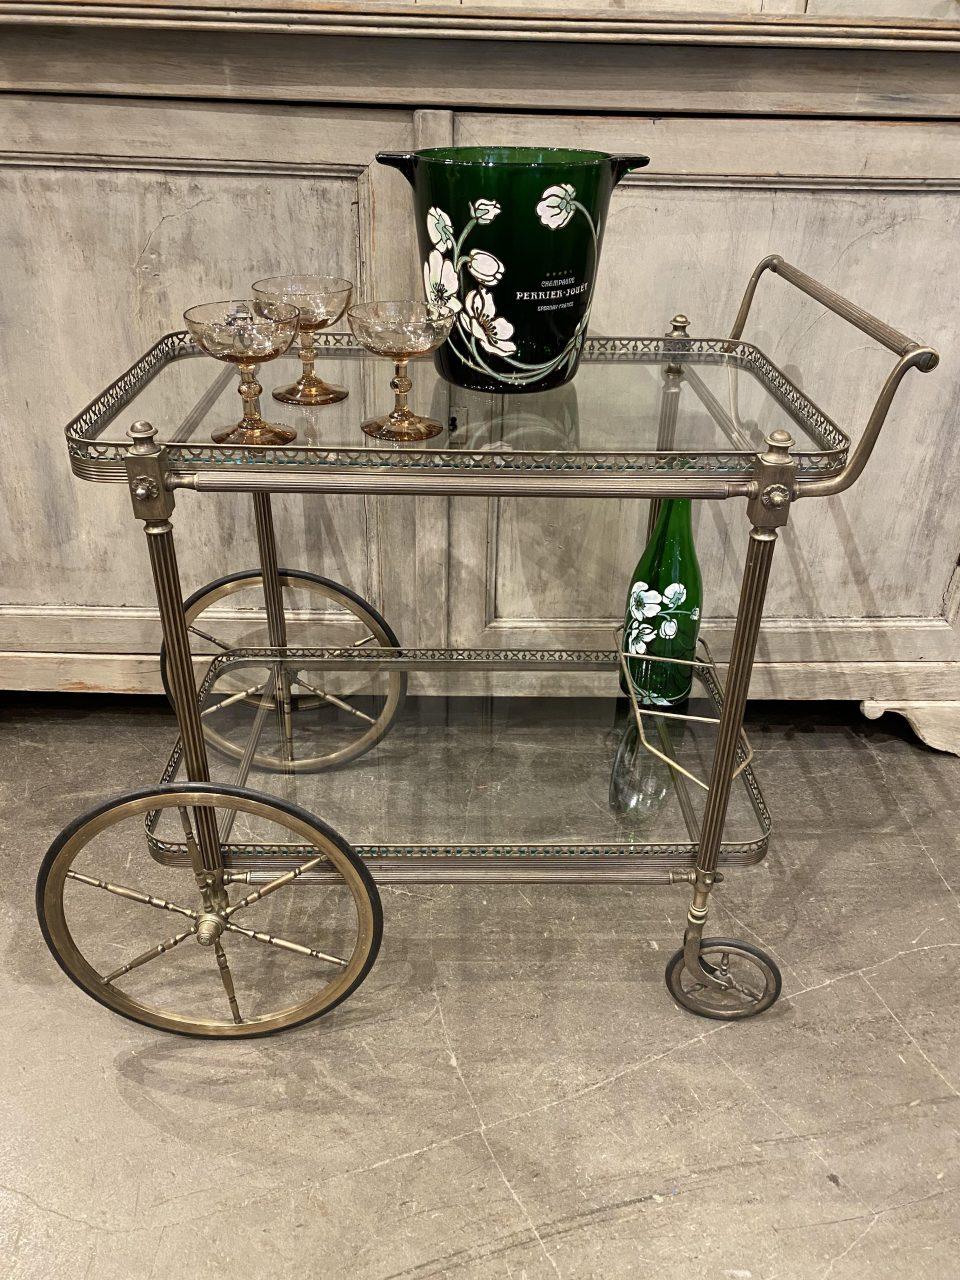 Delightful and presentable midcentury French barcart/ serving trolley. Made of nickel-plated brass, and equipped with handsome large Classic wheels, double glass shelves, bottle holder, and beautiful ornamentation on the sides of each leg.